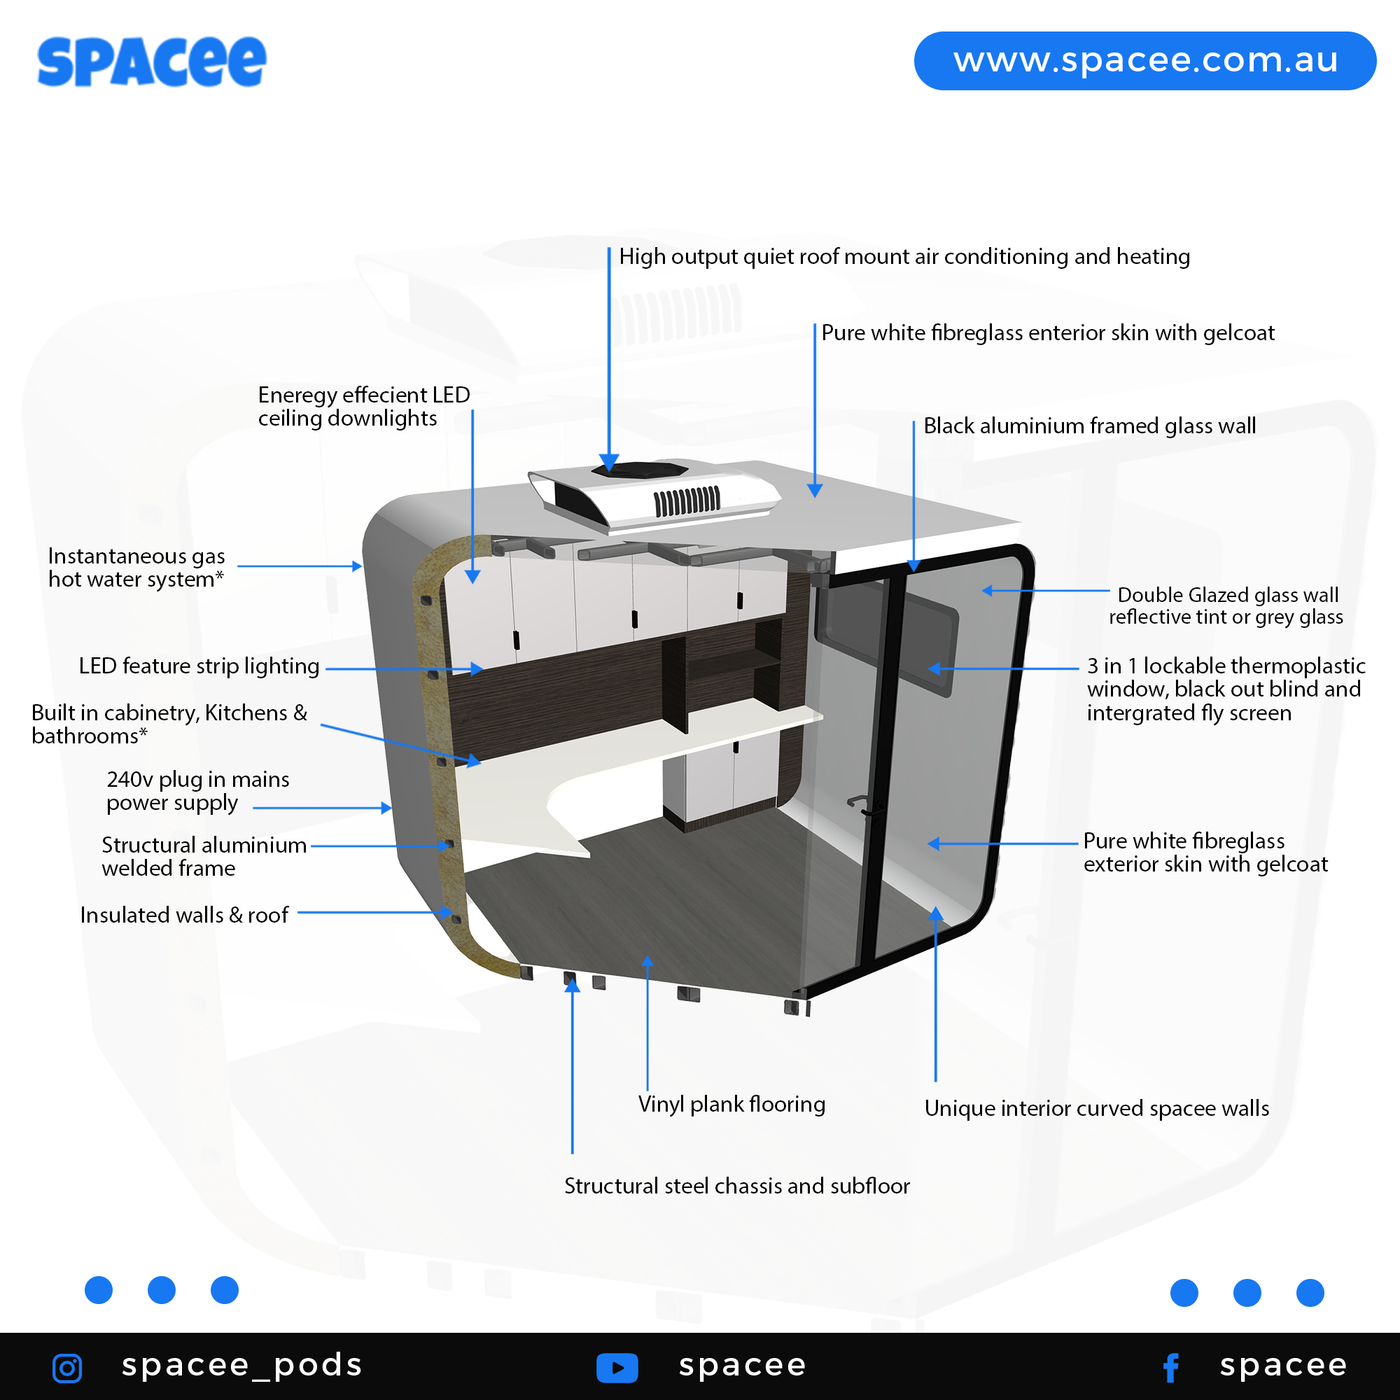 Spacee design labelled with details of interior and exterior design features.